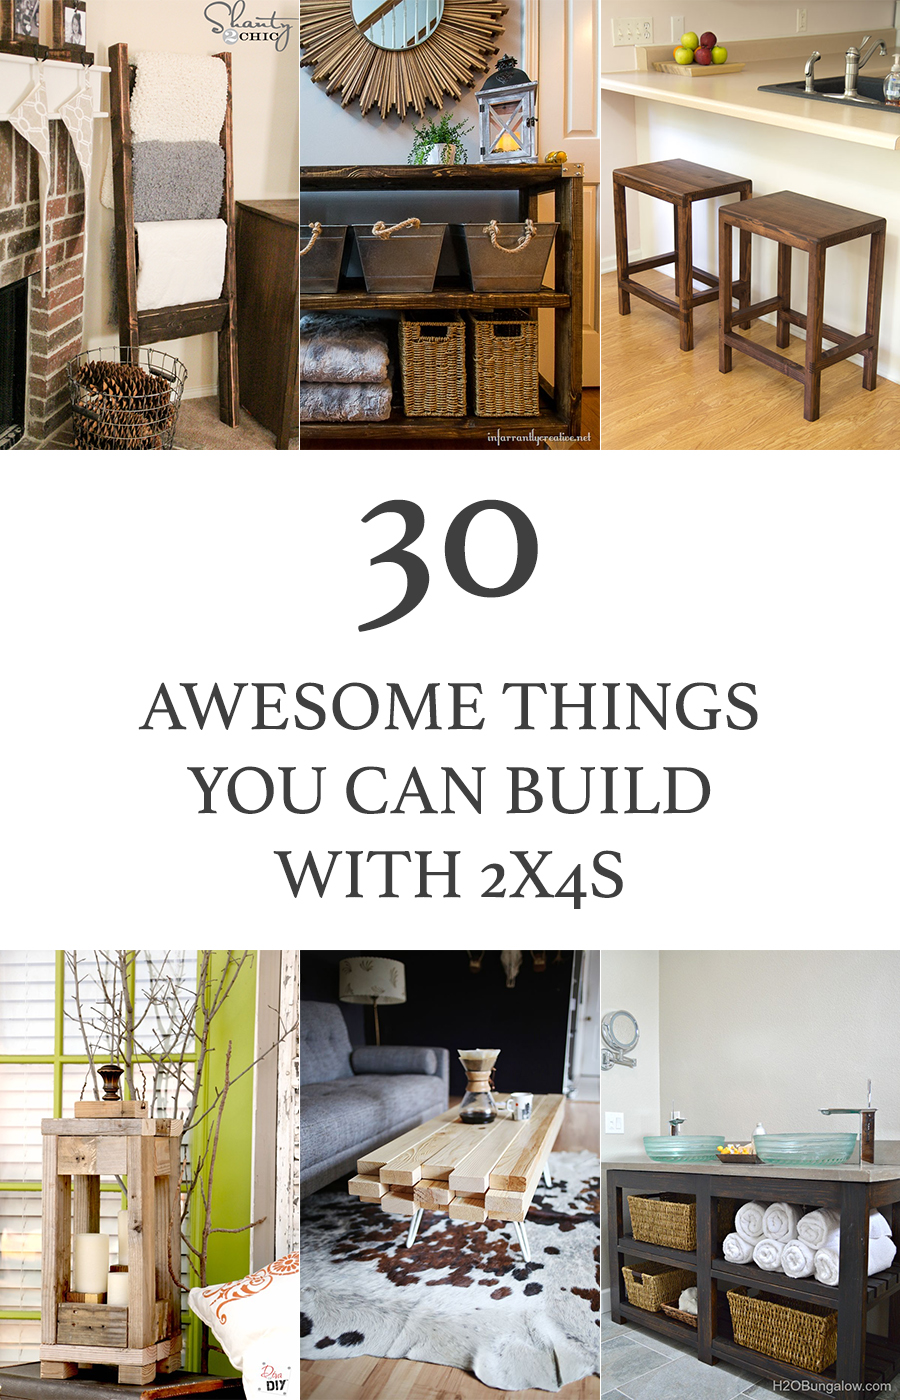 30 Awesome Things You Can Build With 2x4s